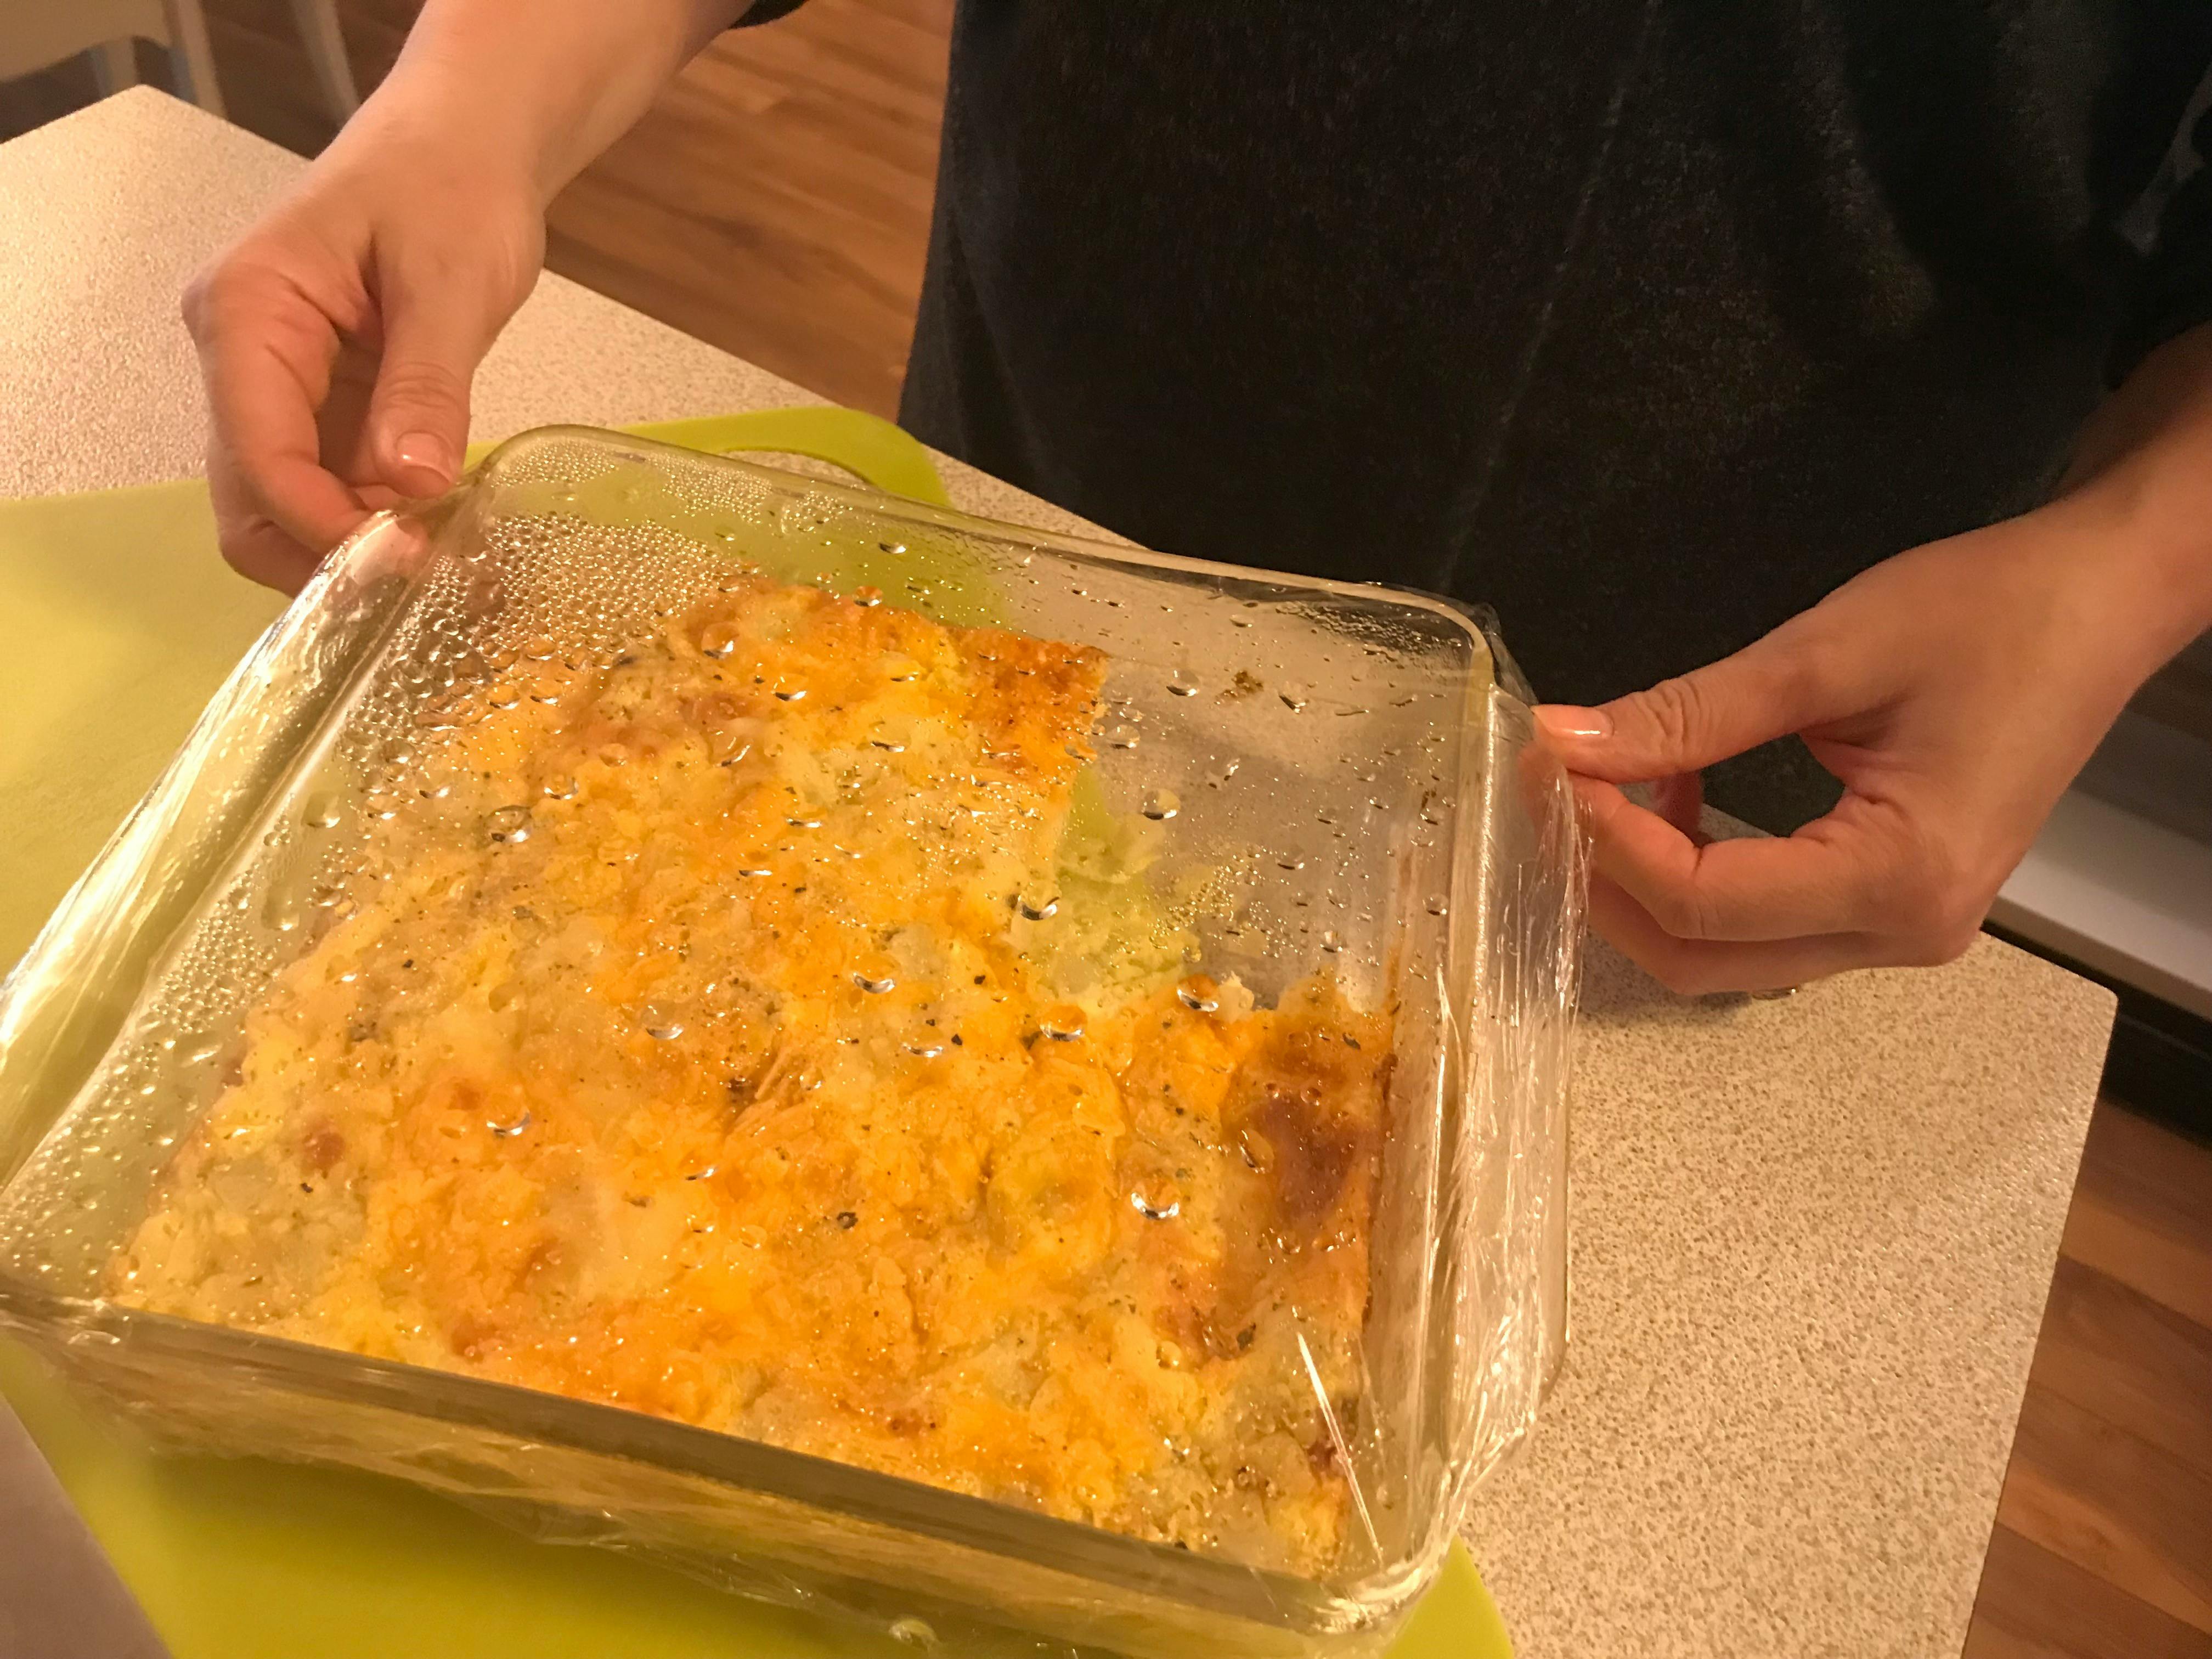 A person putting saran wrap over a dish of leftover food.